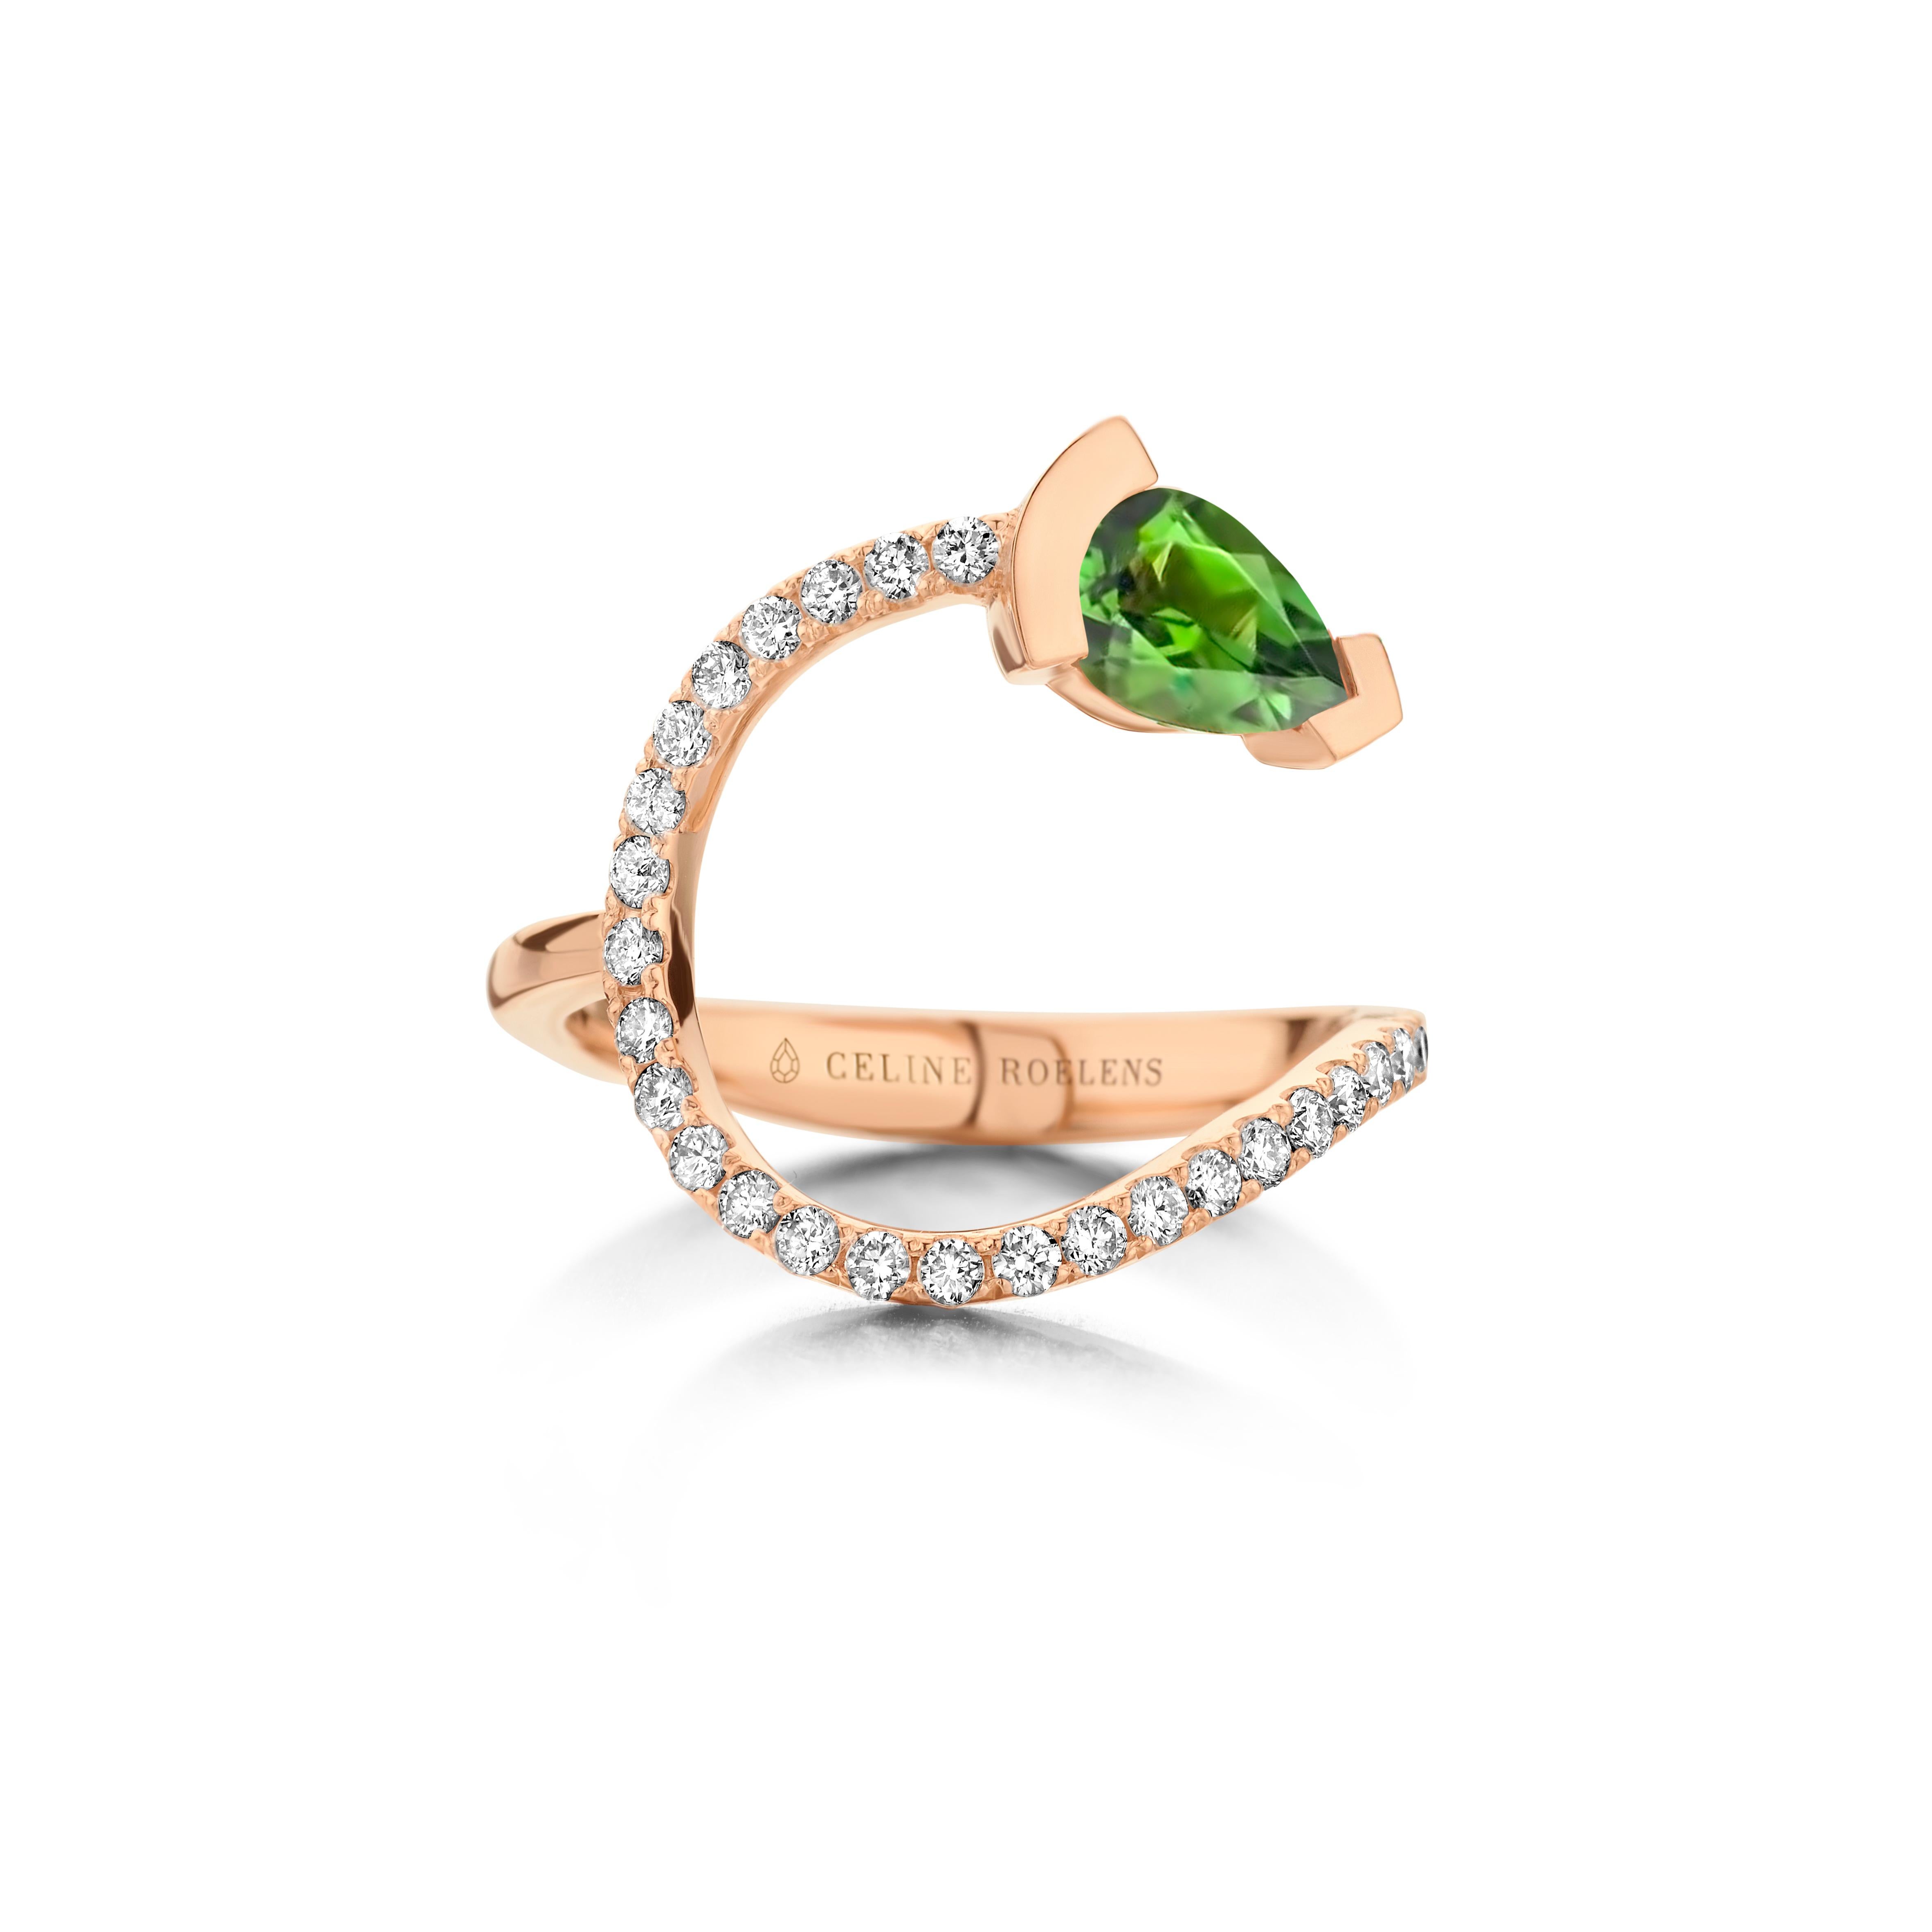 ADELINE curved ring in 18Kt yellow gold set with a pear shaped Green tourmaline and 0,33 Ct of white brilliant cut diamonds - VS F quality.